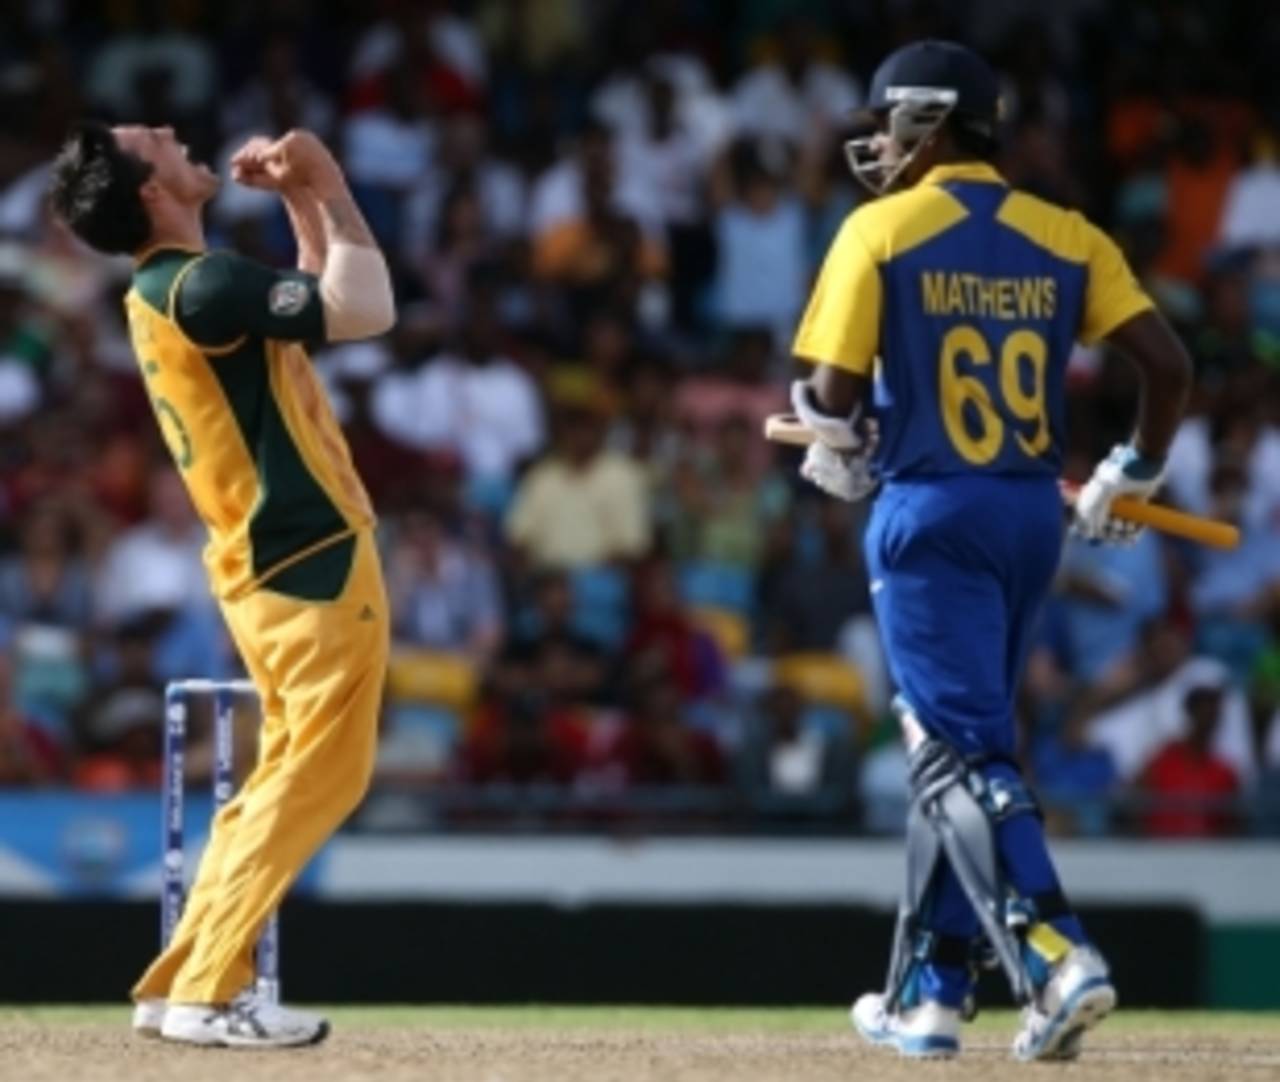 Mitchell Johnson celebrates the second of the two wickets he took in his first over as Angelo Mathews trudges off, Australia v Sri Lanka, World T20, Group F, Bridgetown, May 9, 2010